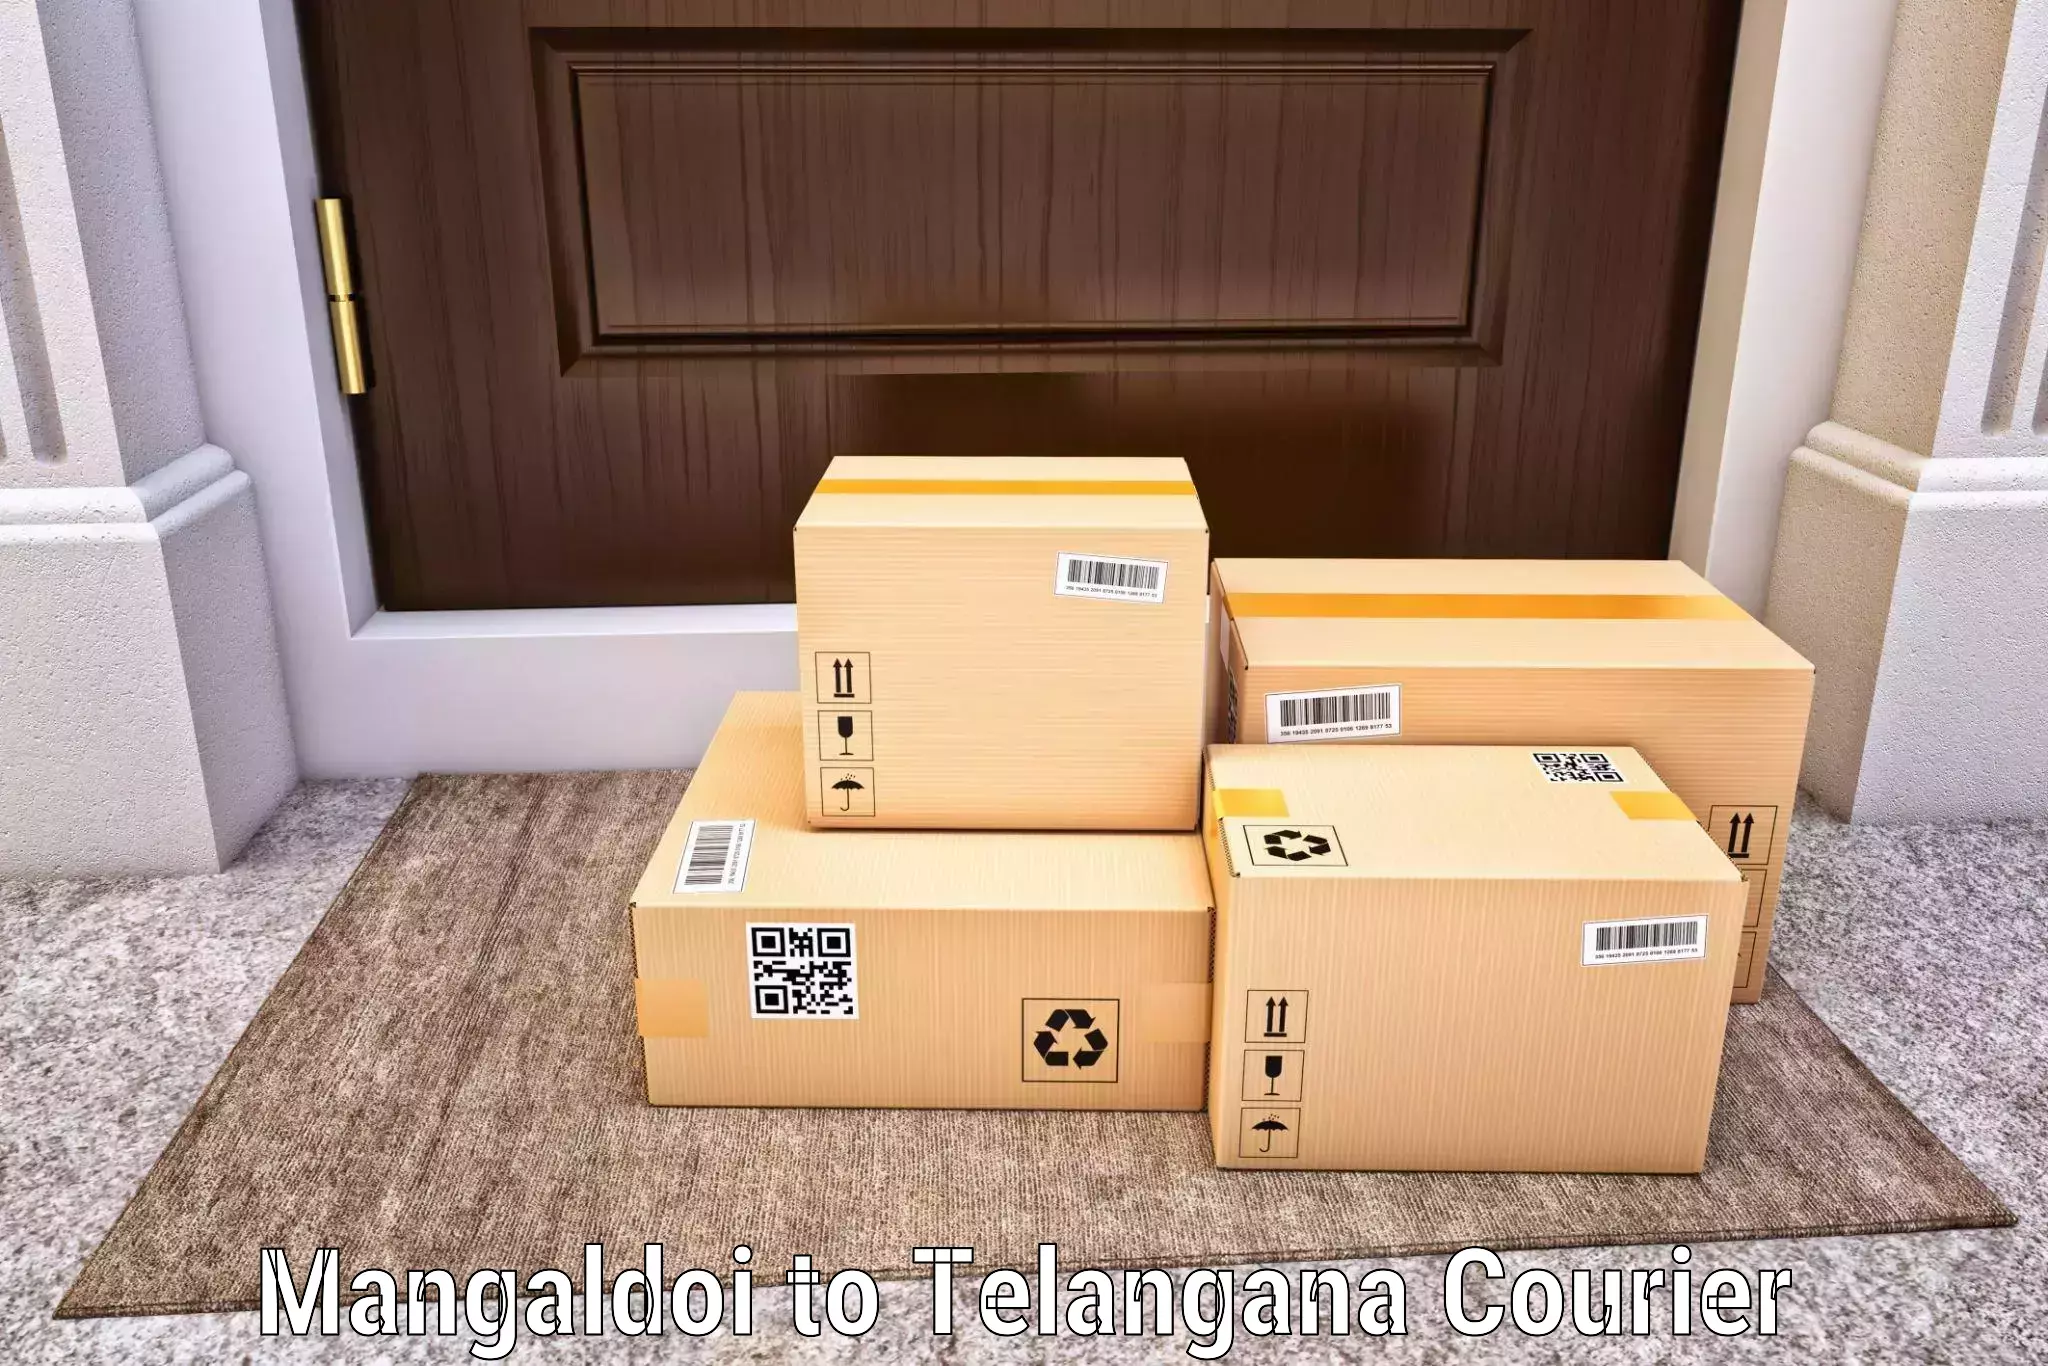 User-friendly courier app Mangaldoi to Hyderabad